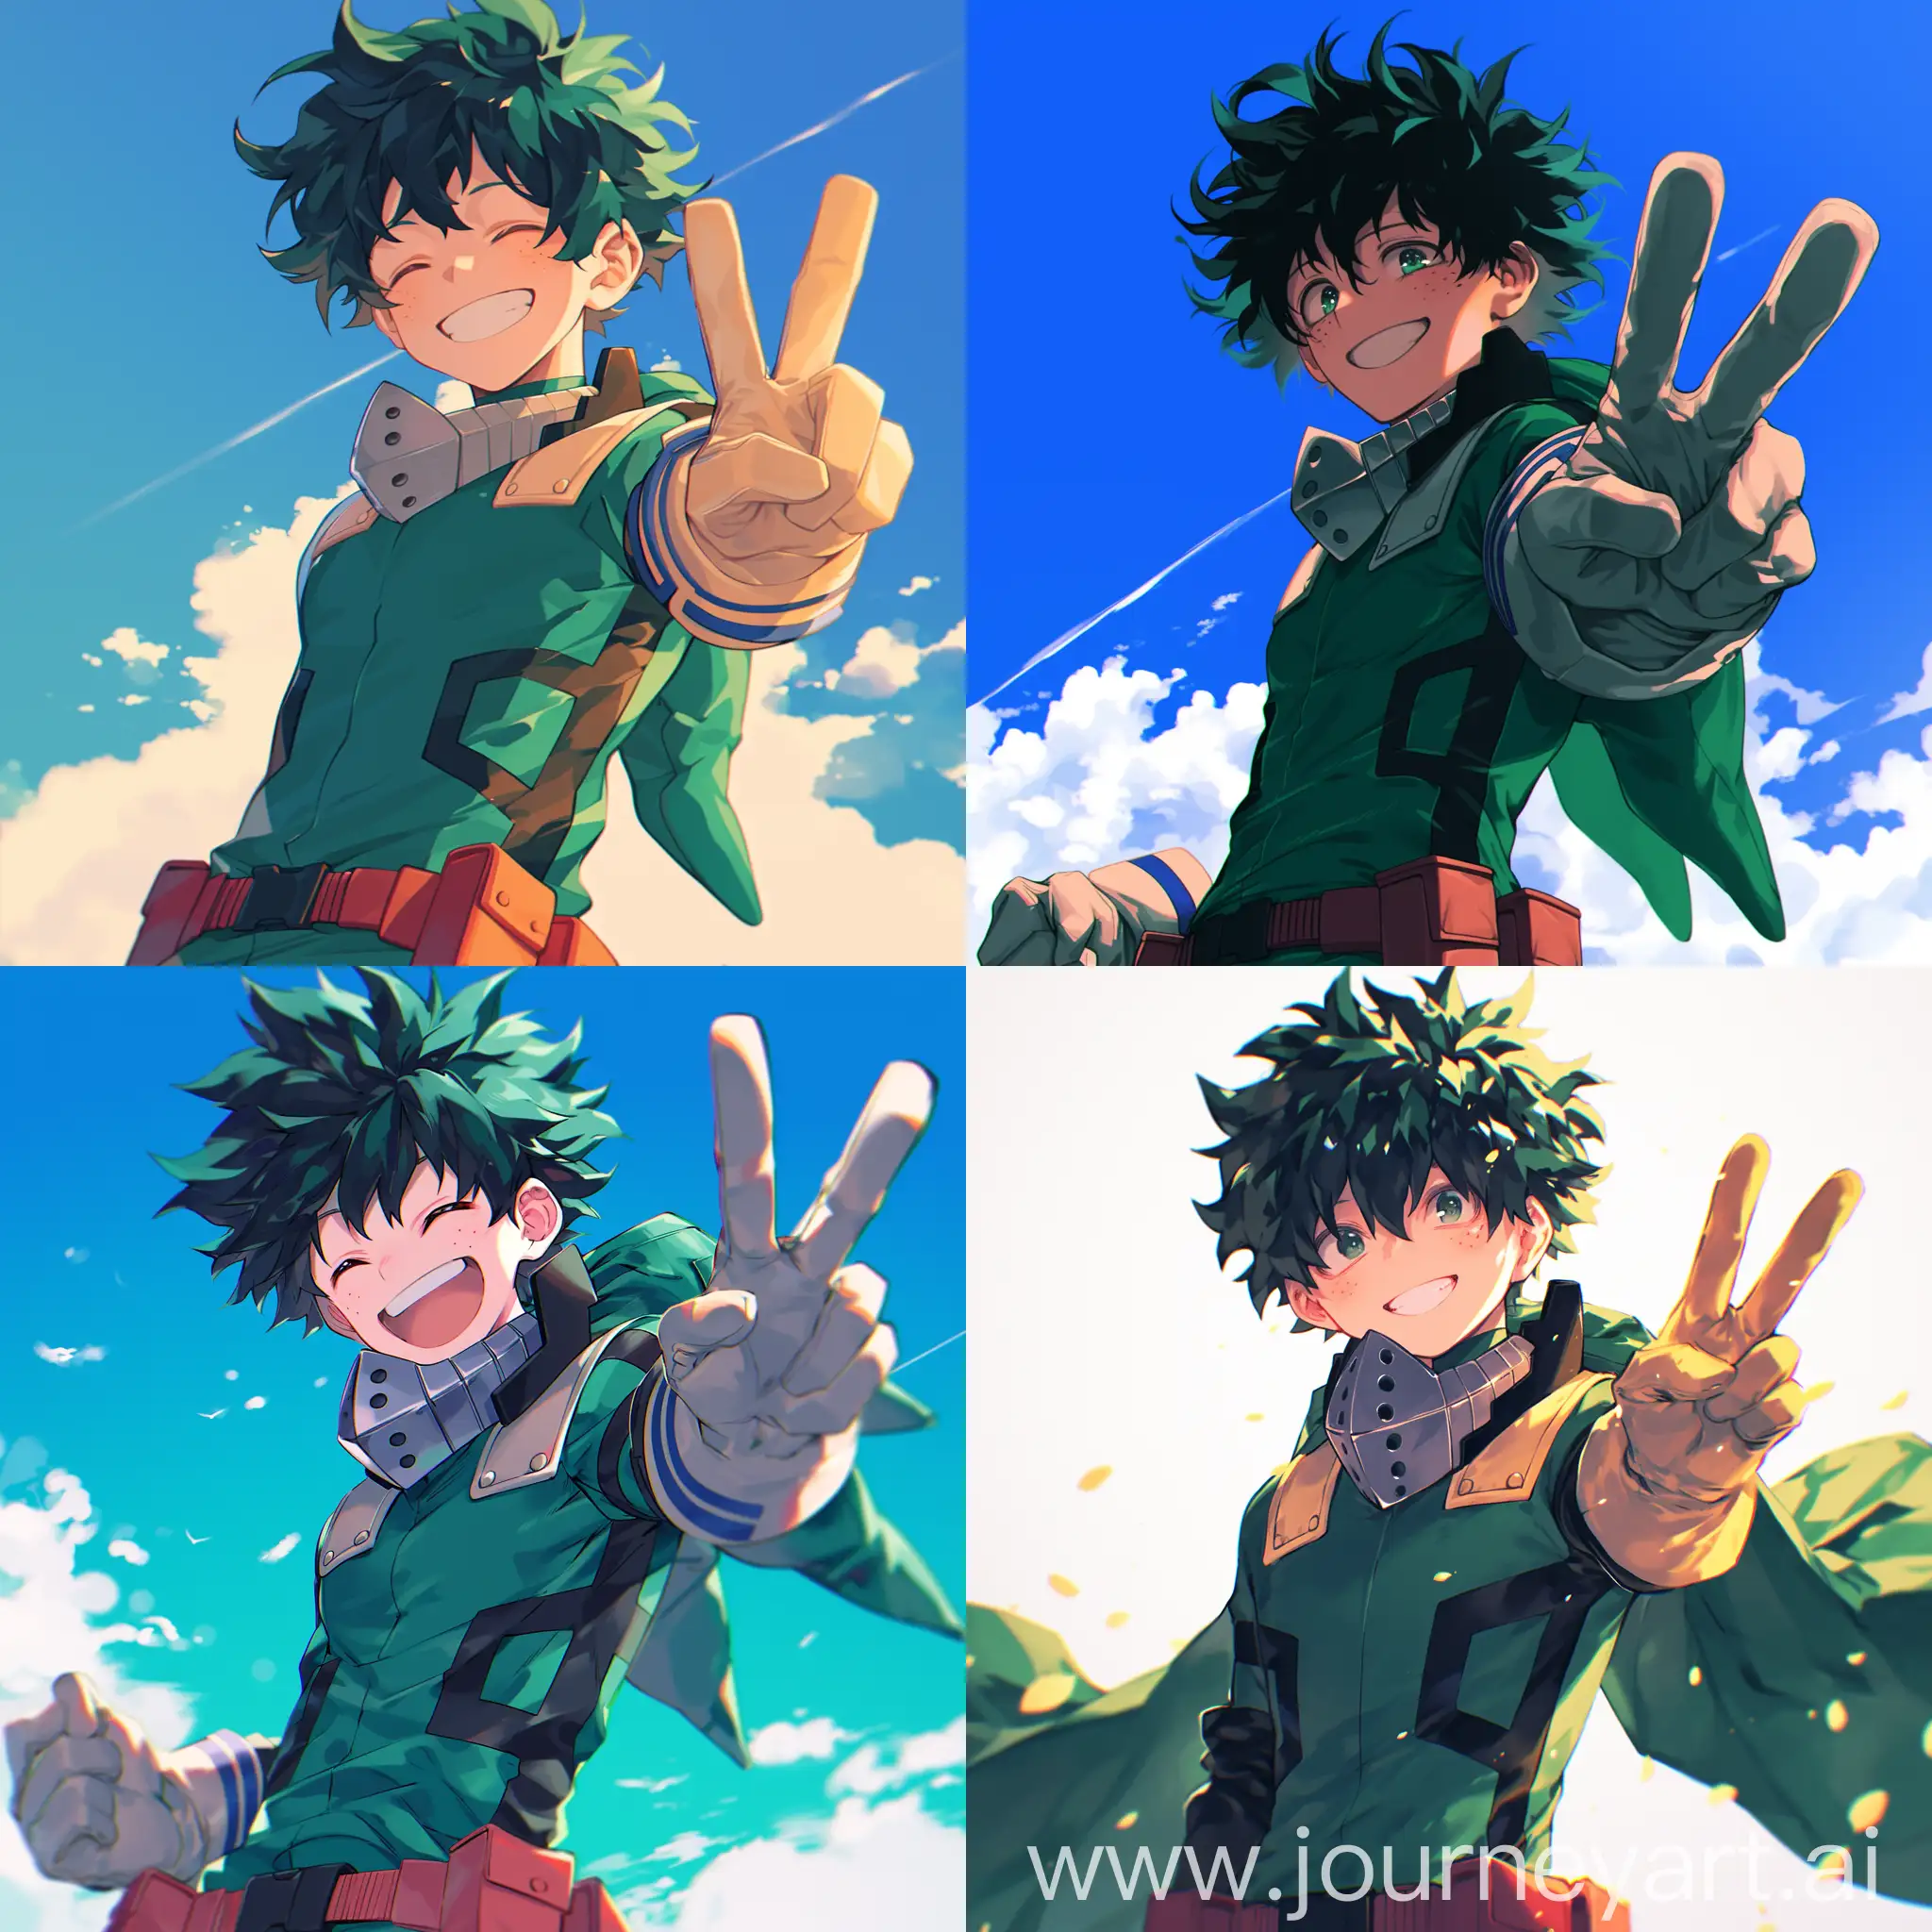 Deku-from-MHA-Smiling-in-Green-Costume-with-Peace-Sign